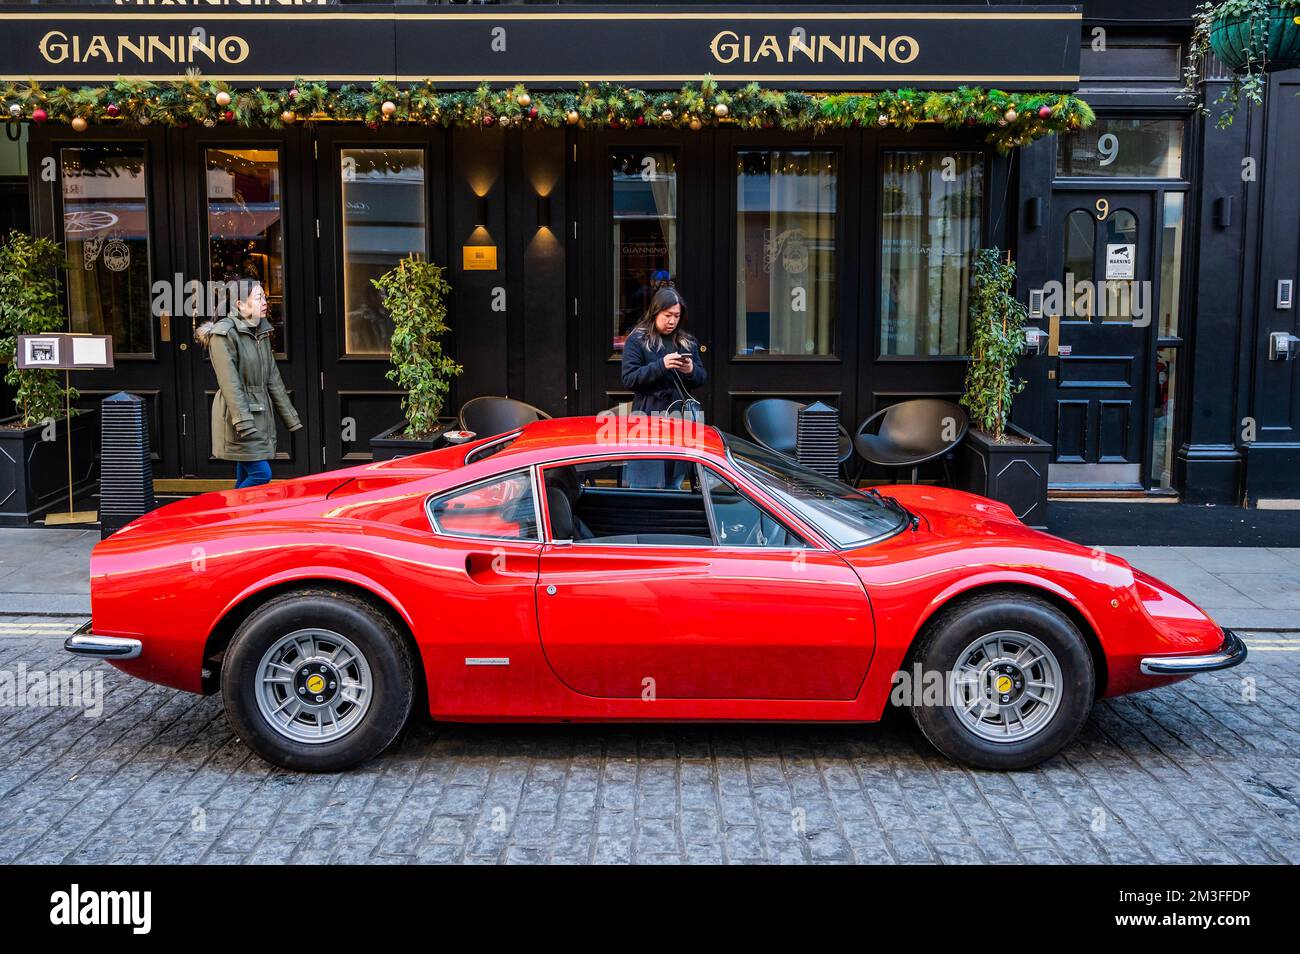 London, UK. 15th Dec, 2022. 1971 Ferrari Dino 246 GT Coupé, est £250,000 - £300,000 - A preview of the Street Collector Cars sale at Bonhams New Bond Street. The Sal takes place on 16 Dec 2022. Credit: Guy Bell/Alamy Live News Stock Photo